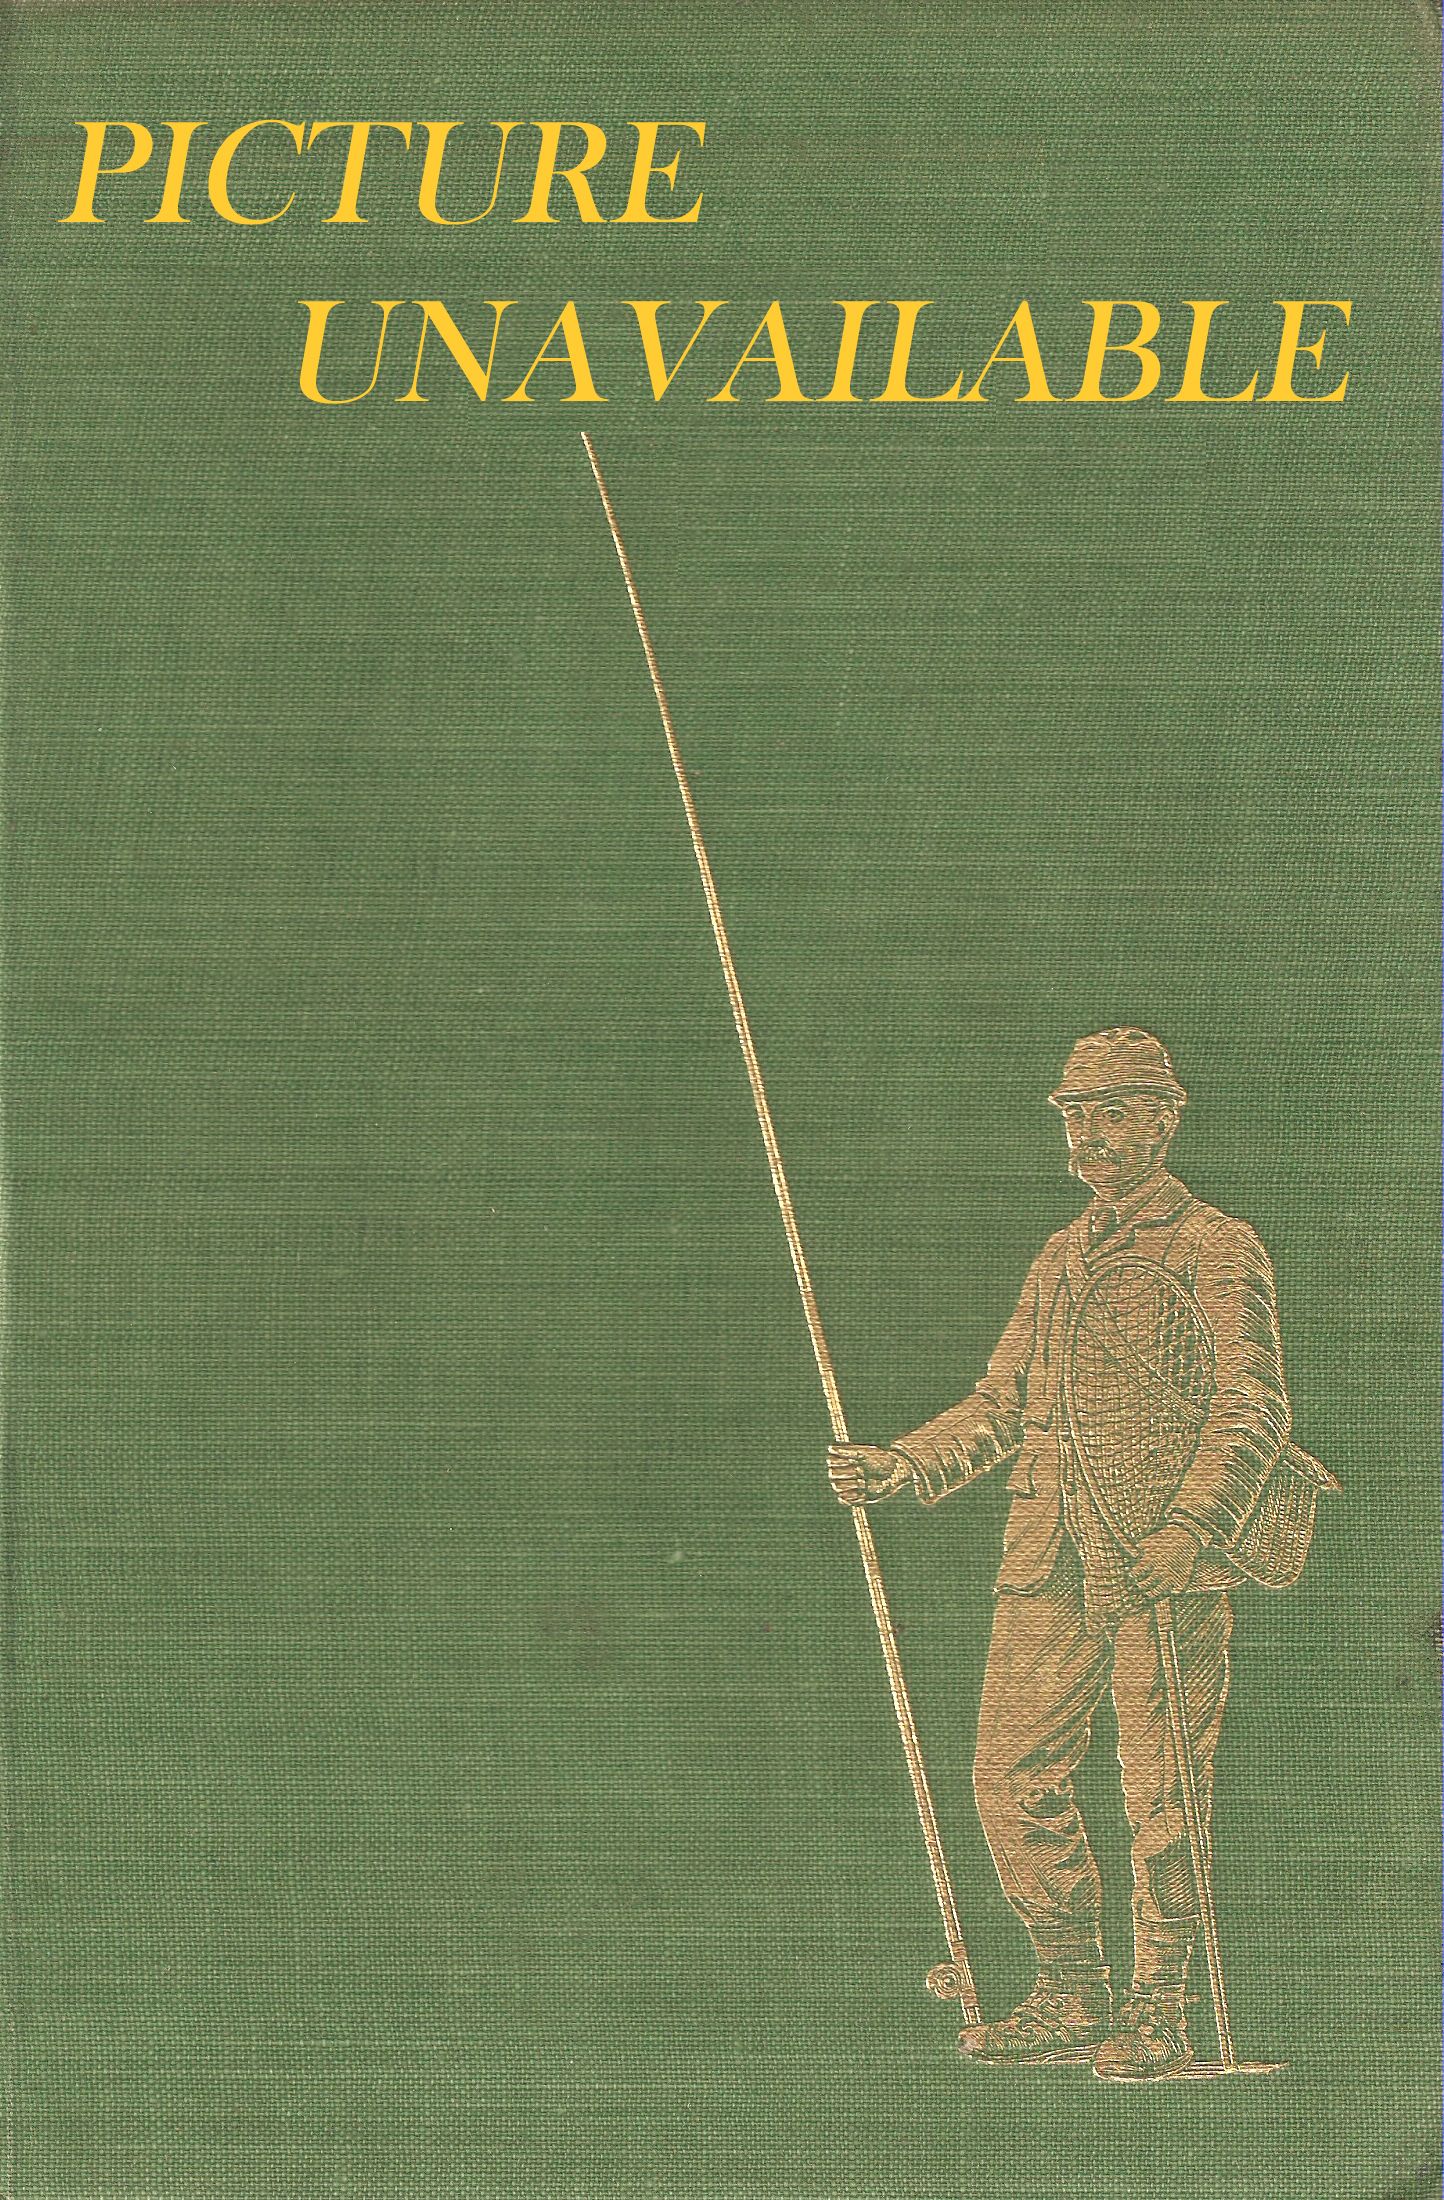 THE FALCONER: THE JOURNAL OF THE BRITISH FALCONERS' CLUB 1937 - 1971.